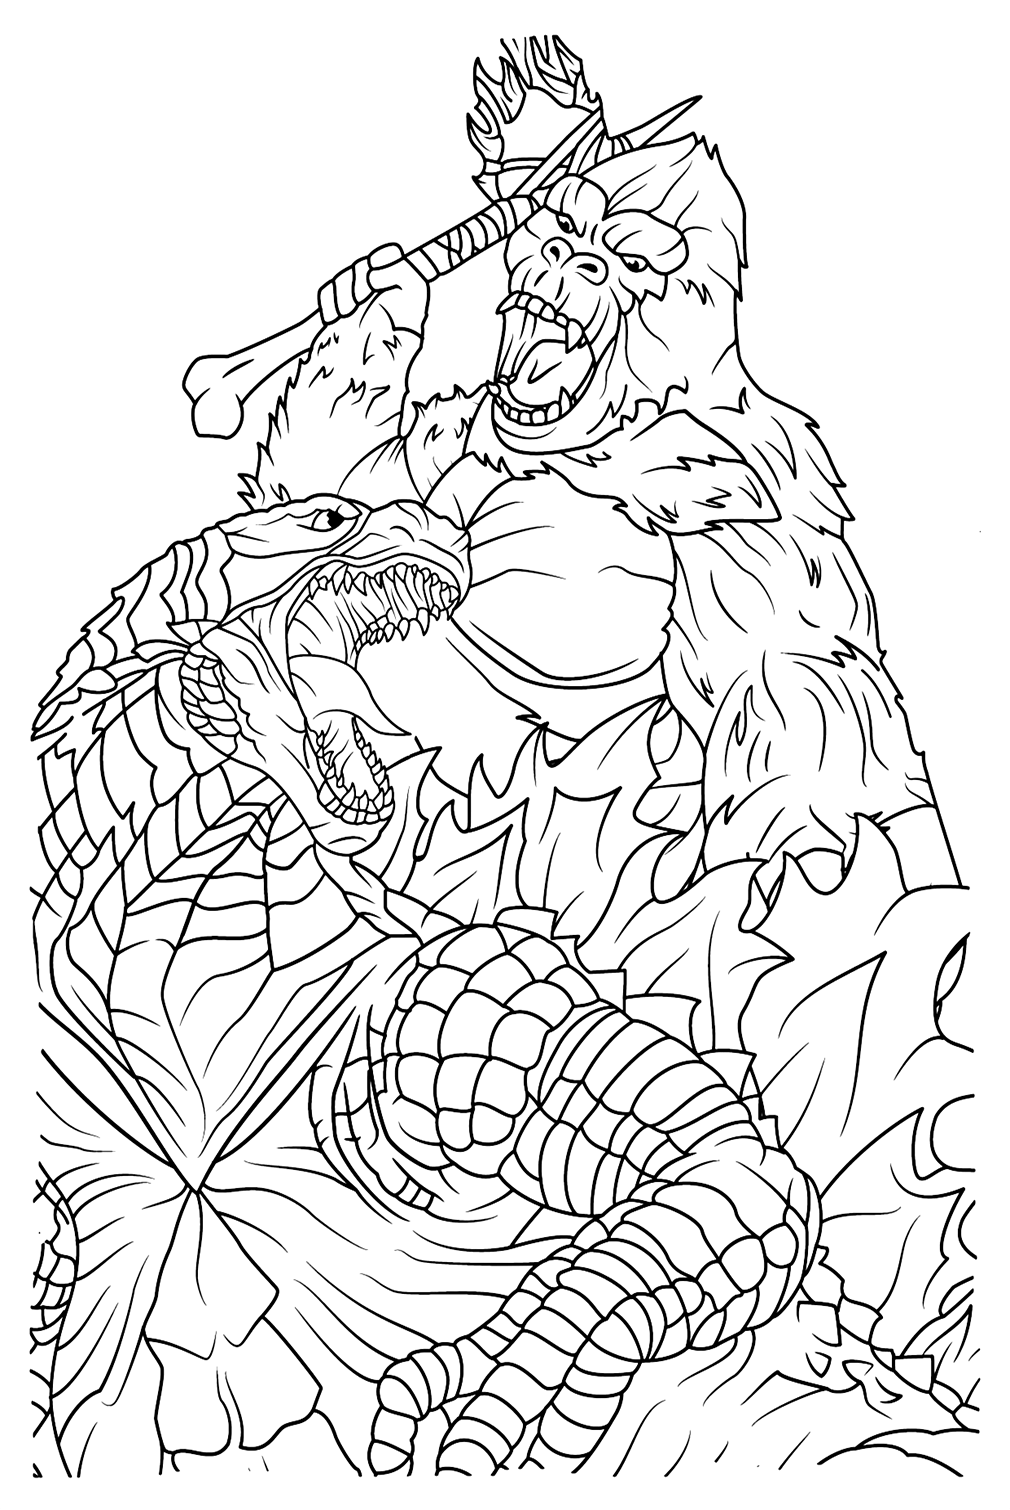 King kong coloring pages